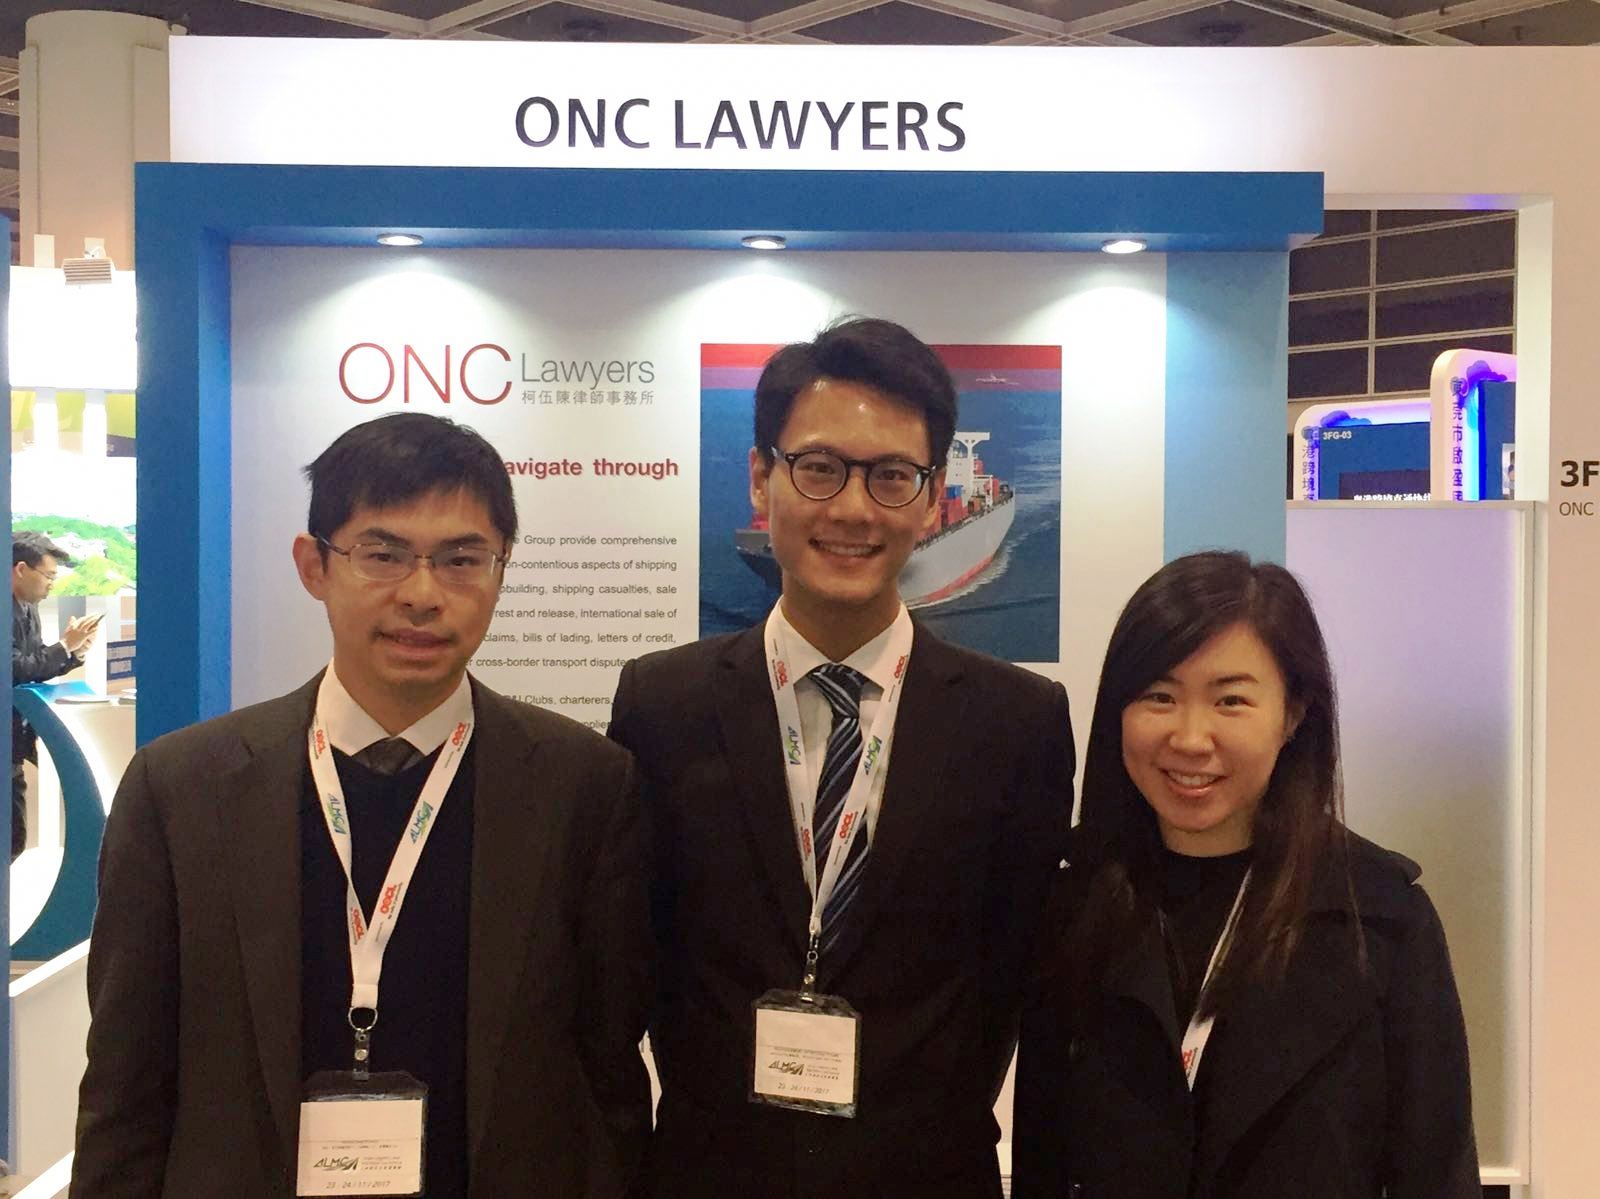 ONC Lawyers participated in the Asian Logistics and Maritime Conference 2017